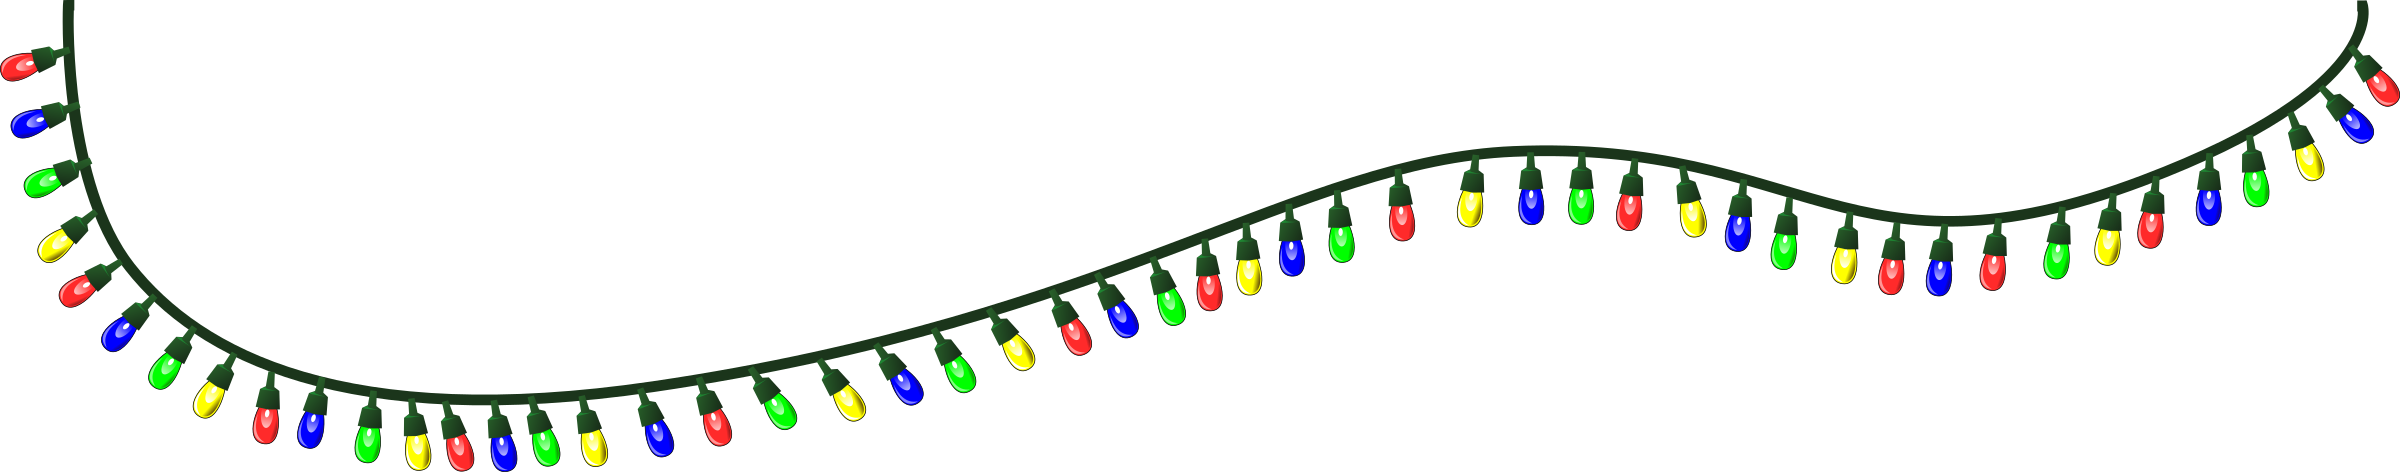 free holiday lights clipart - photo #47